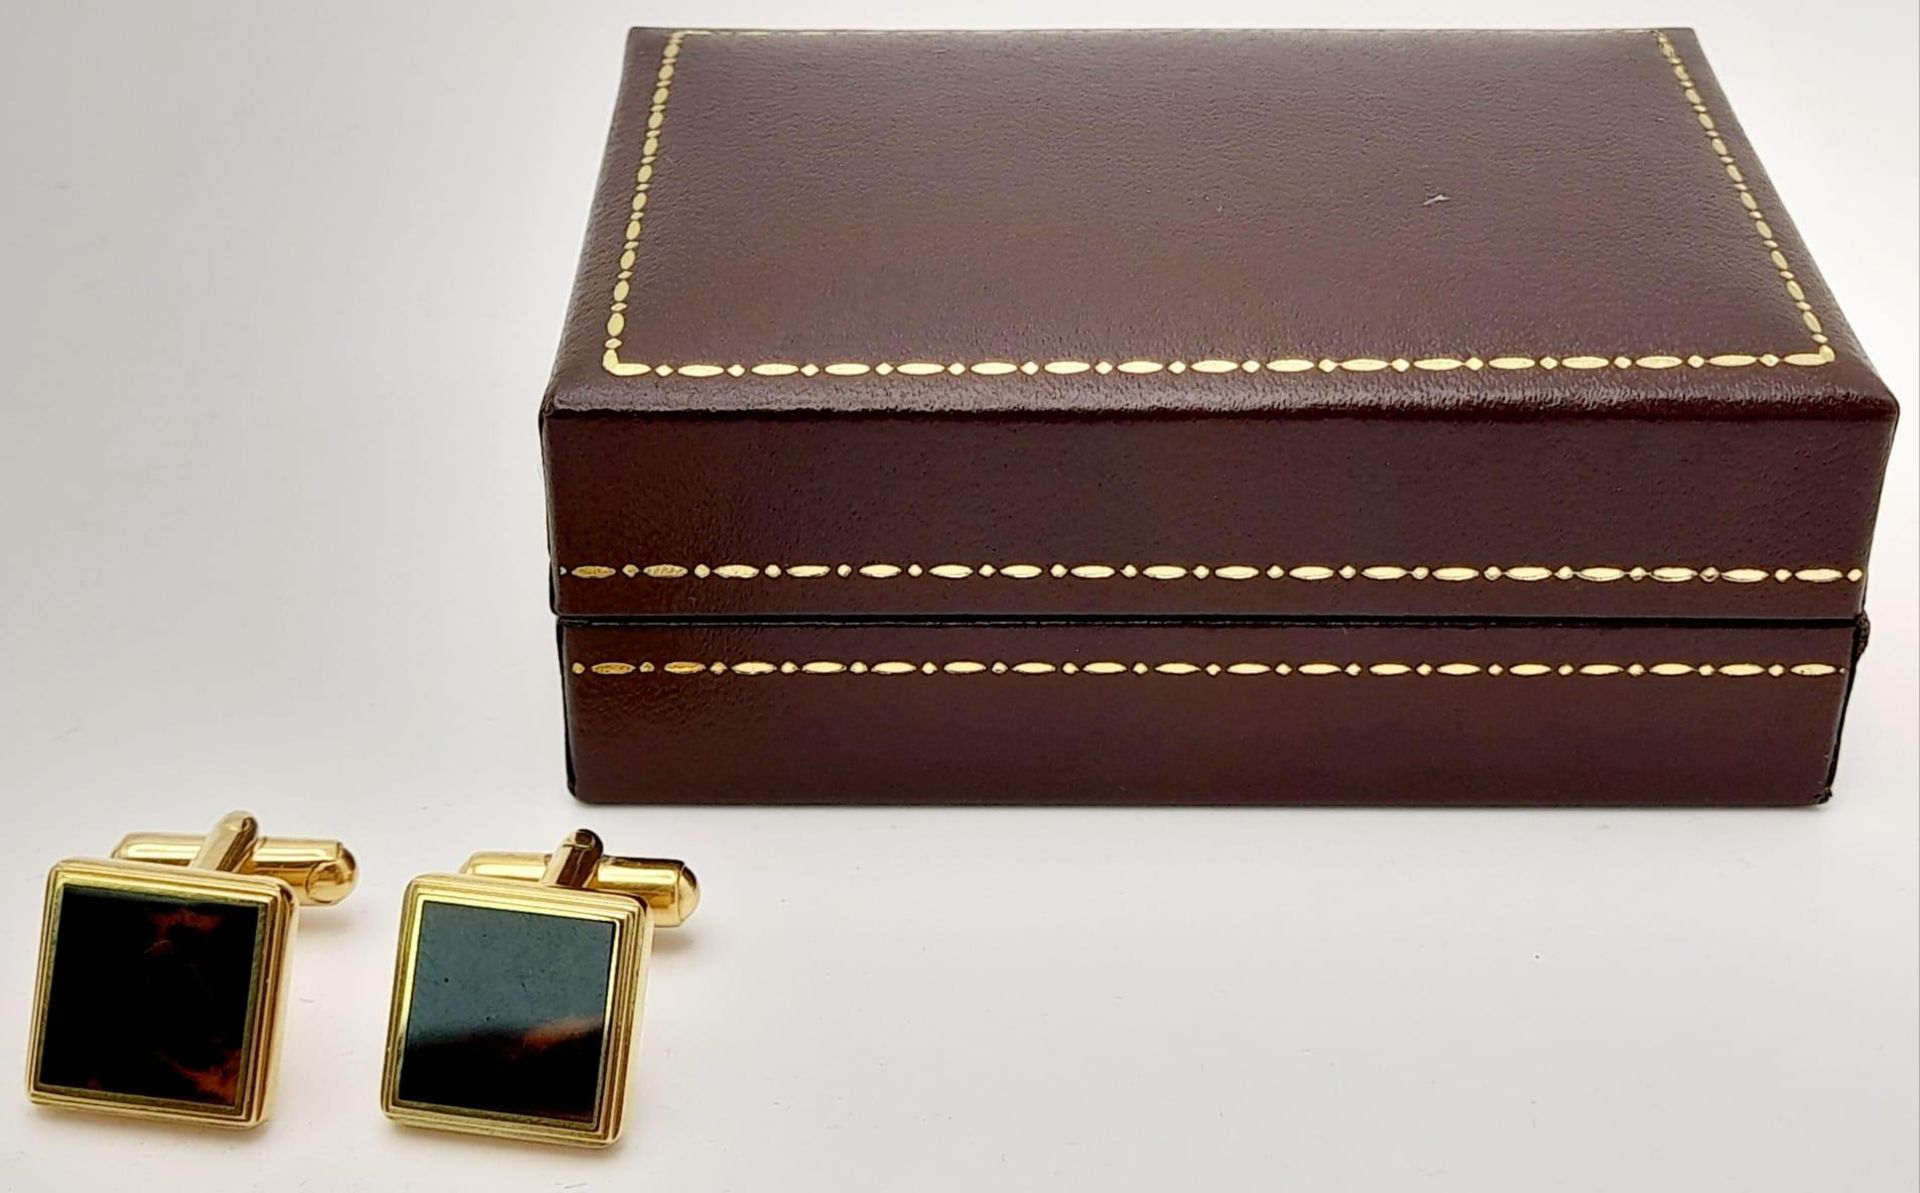 An Excellent Condition Pair of Square Yellow Gold Gilt Tortoiseshell Cufflinks by Dunhill in their - Image 7 of 8